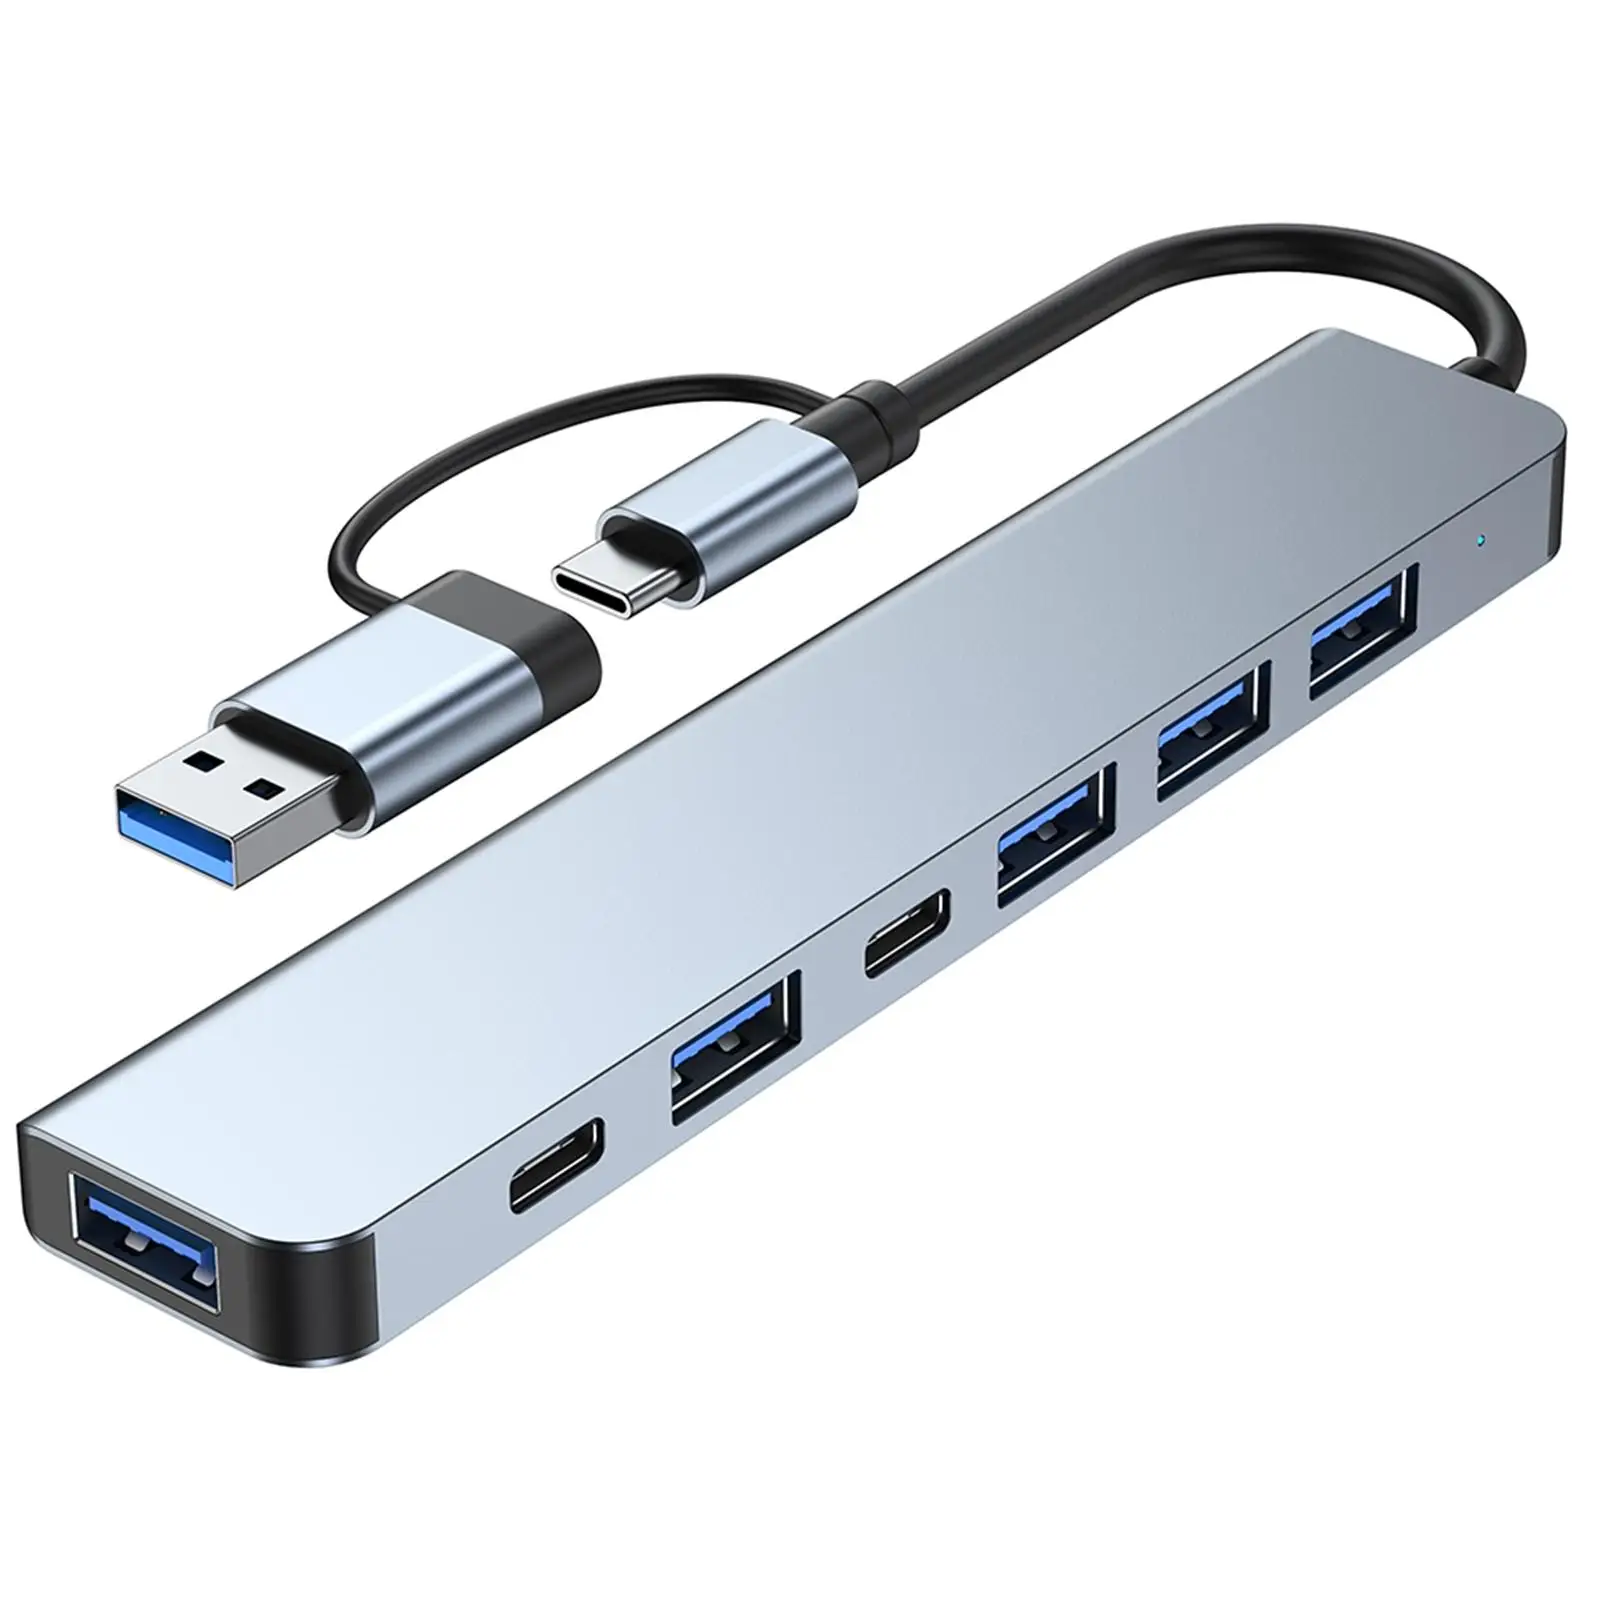 7 Ports USB Type C Hub with A 5W Charging Port Plug and Play Multiport Adapter Converter for Phones Type C Devices Laptop